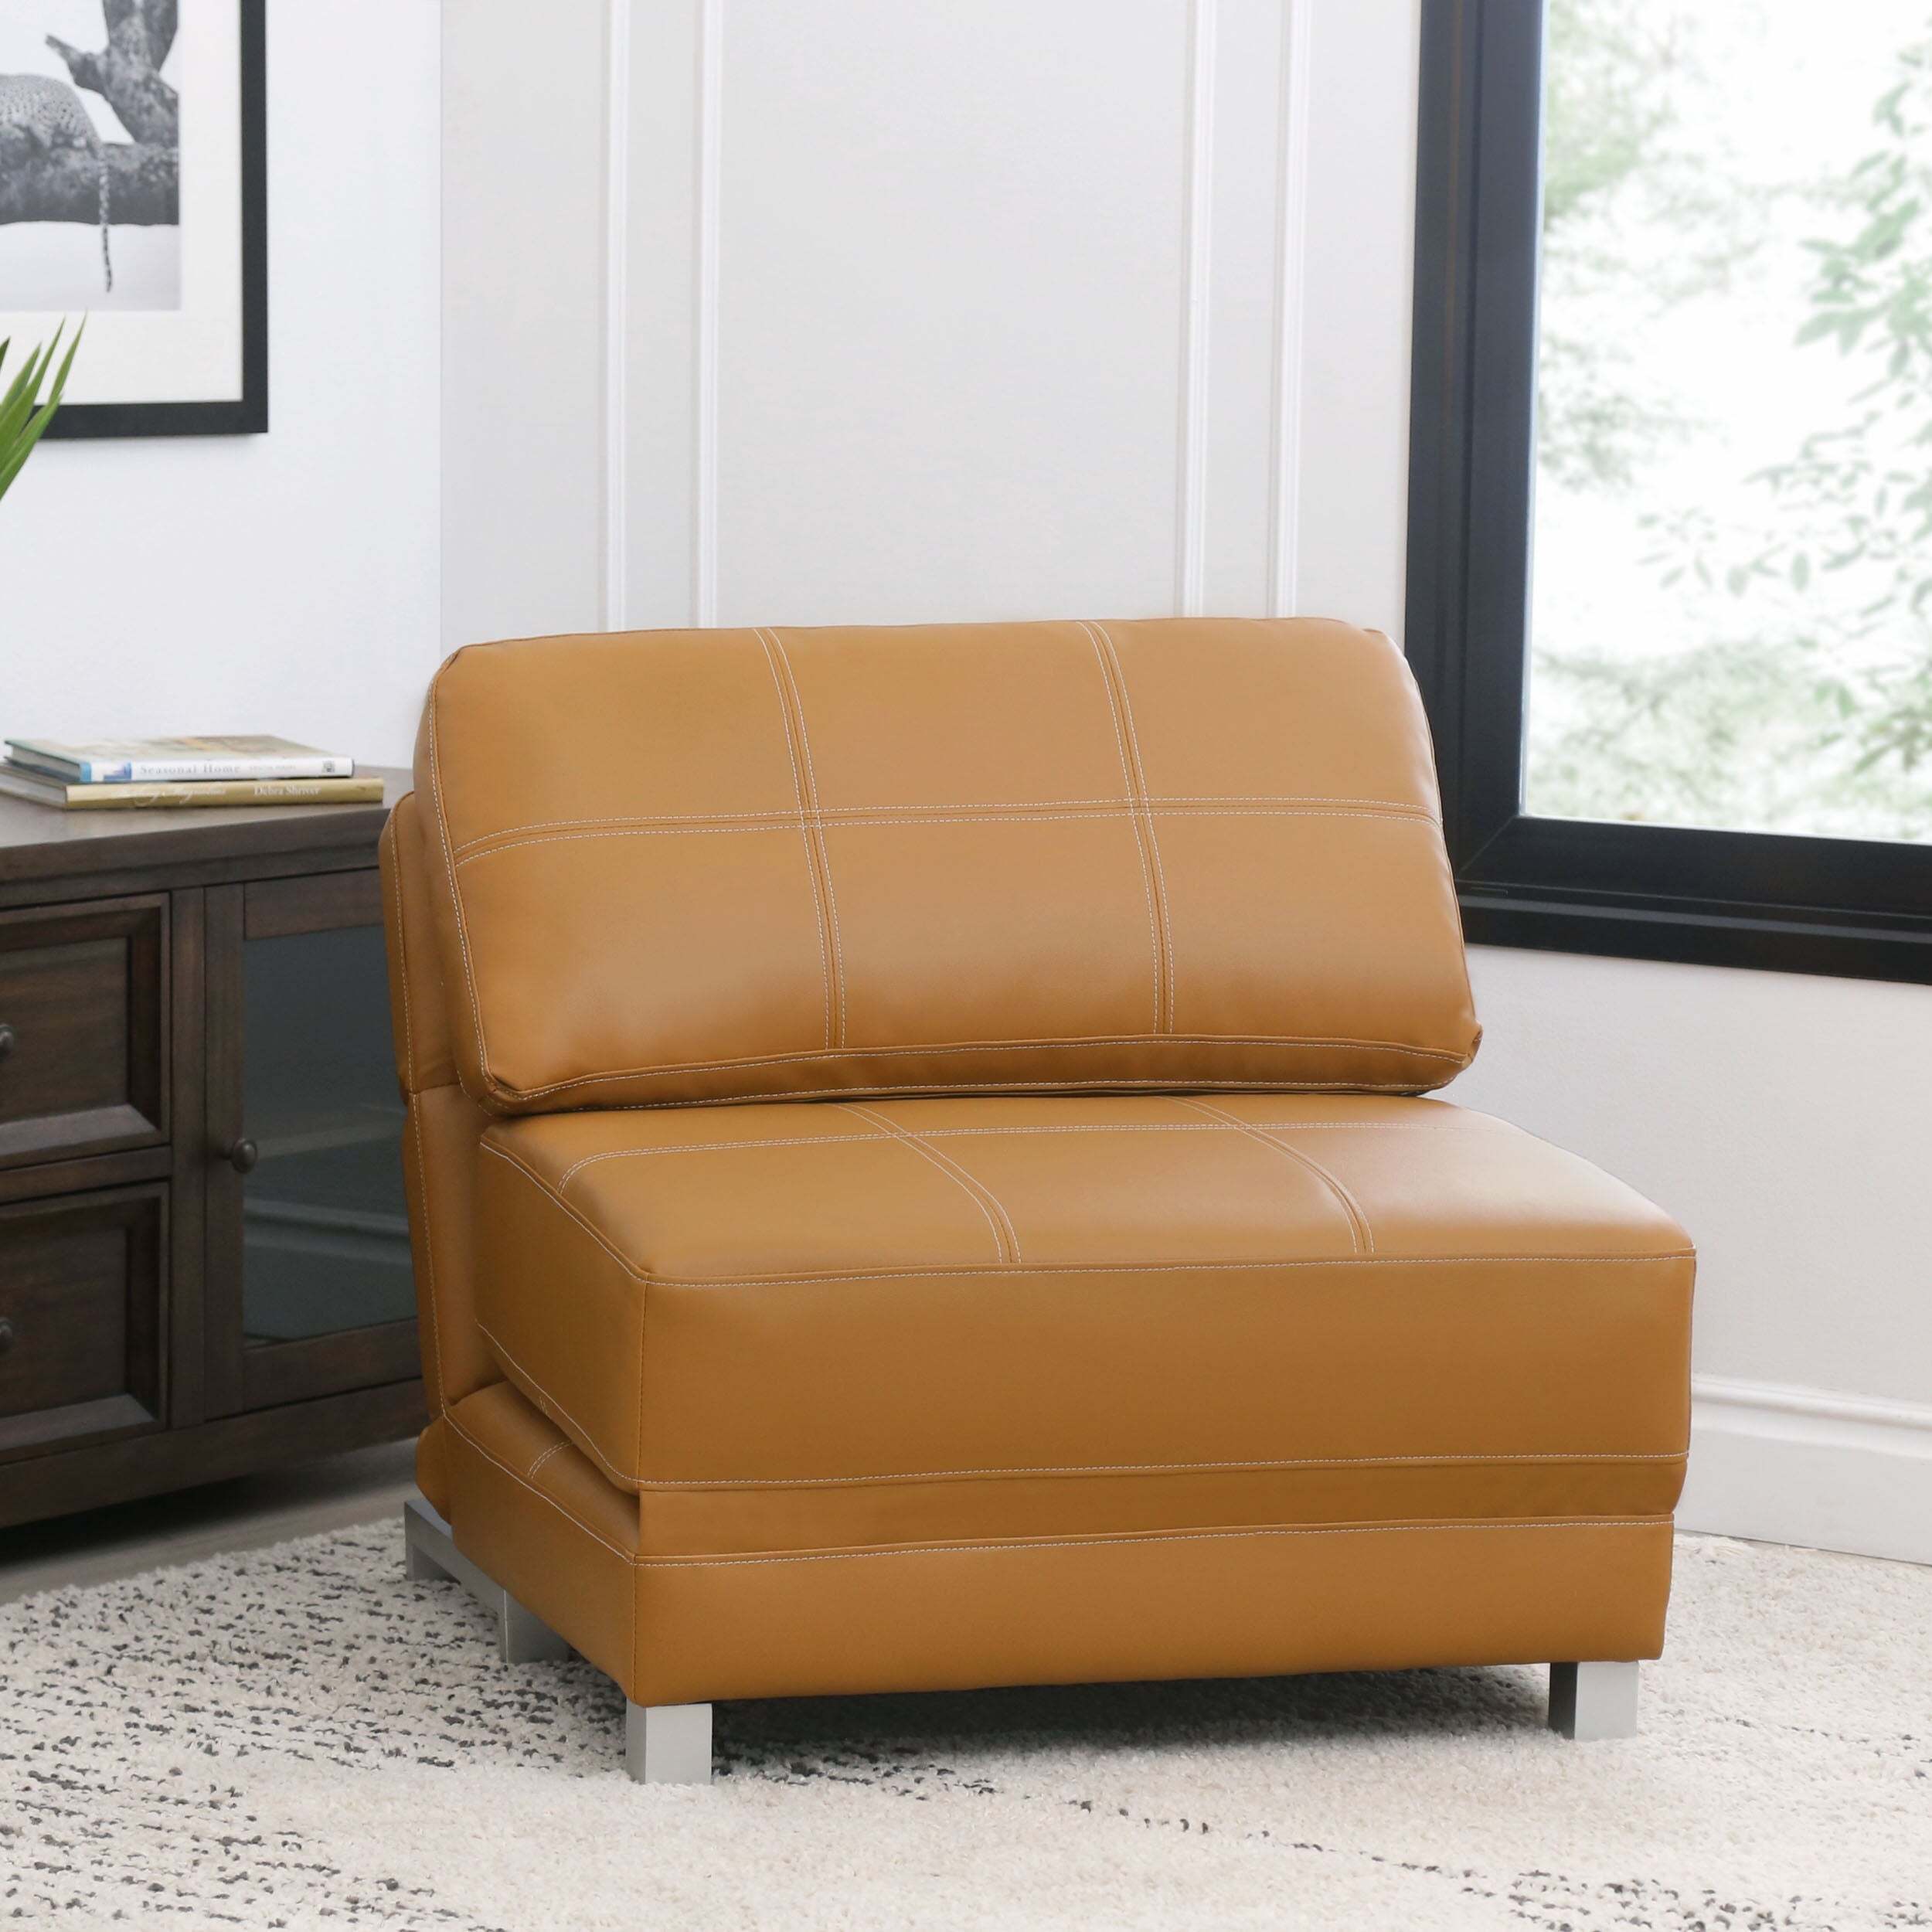 Faux Leather Camel Low Fold Out Chair Bed